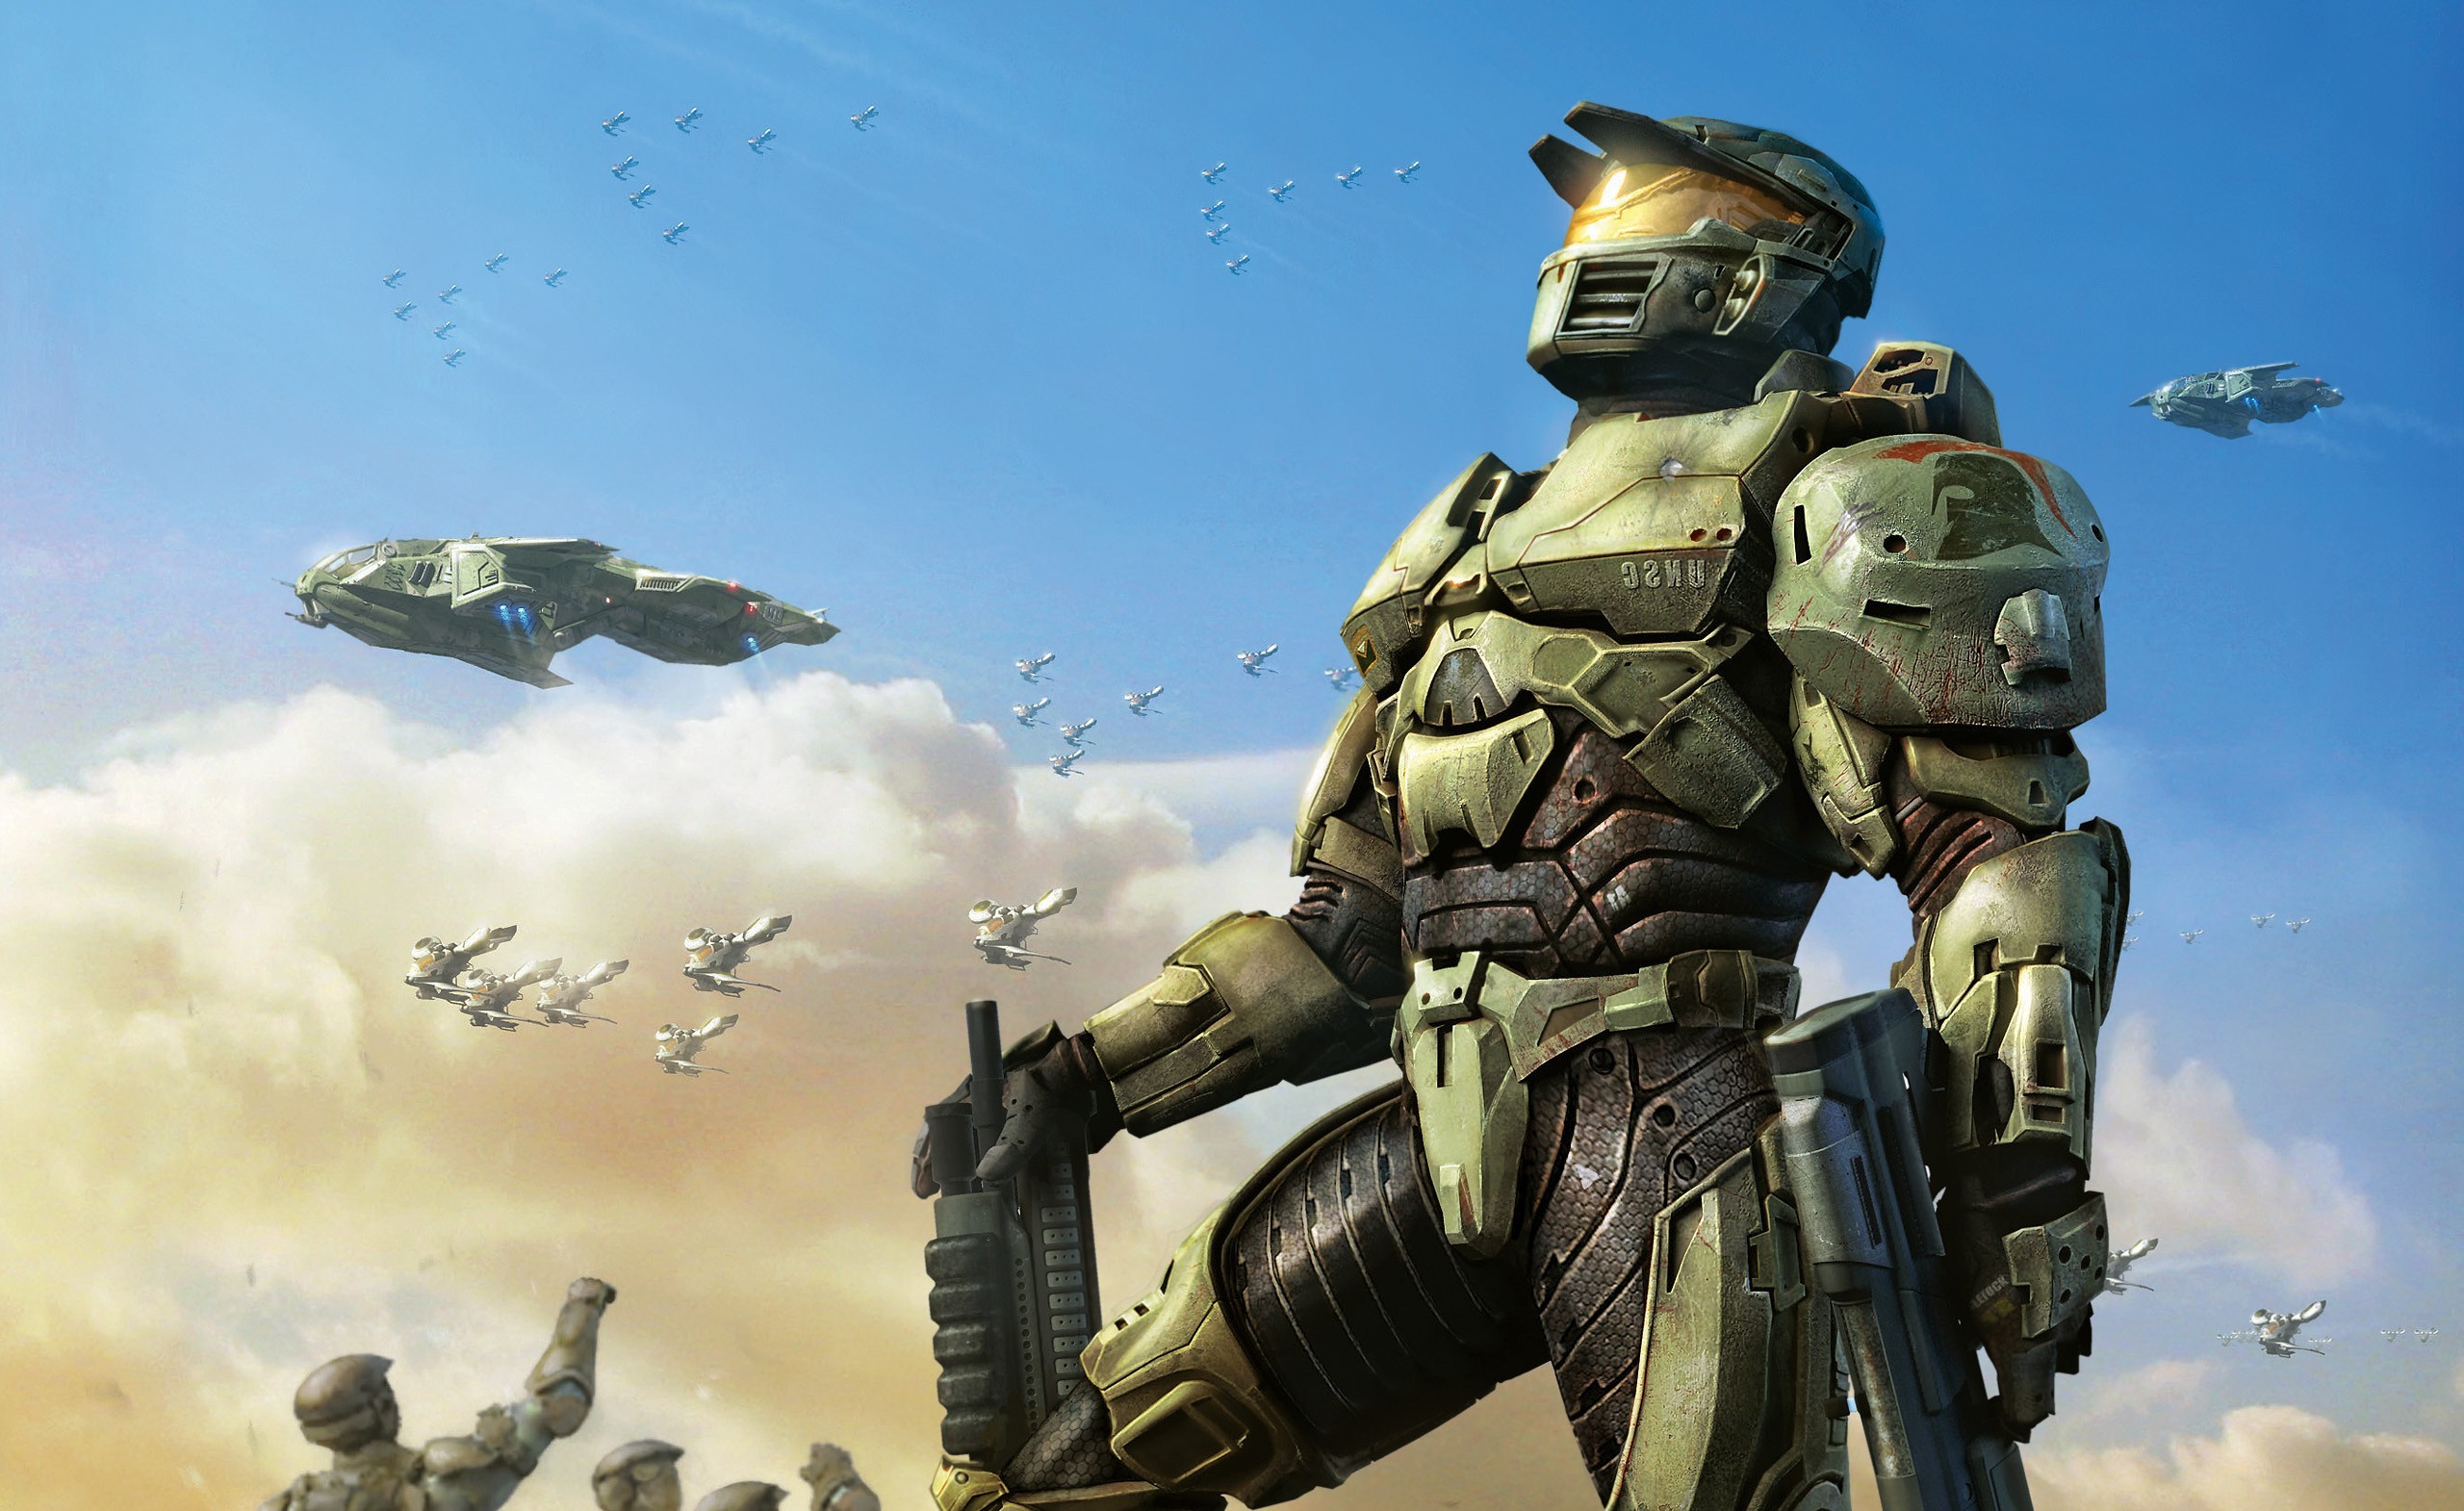 Wallpapers Halo Master Chief military on the desktop